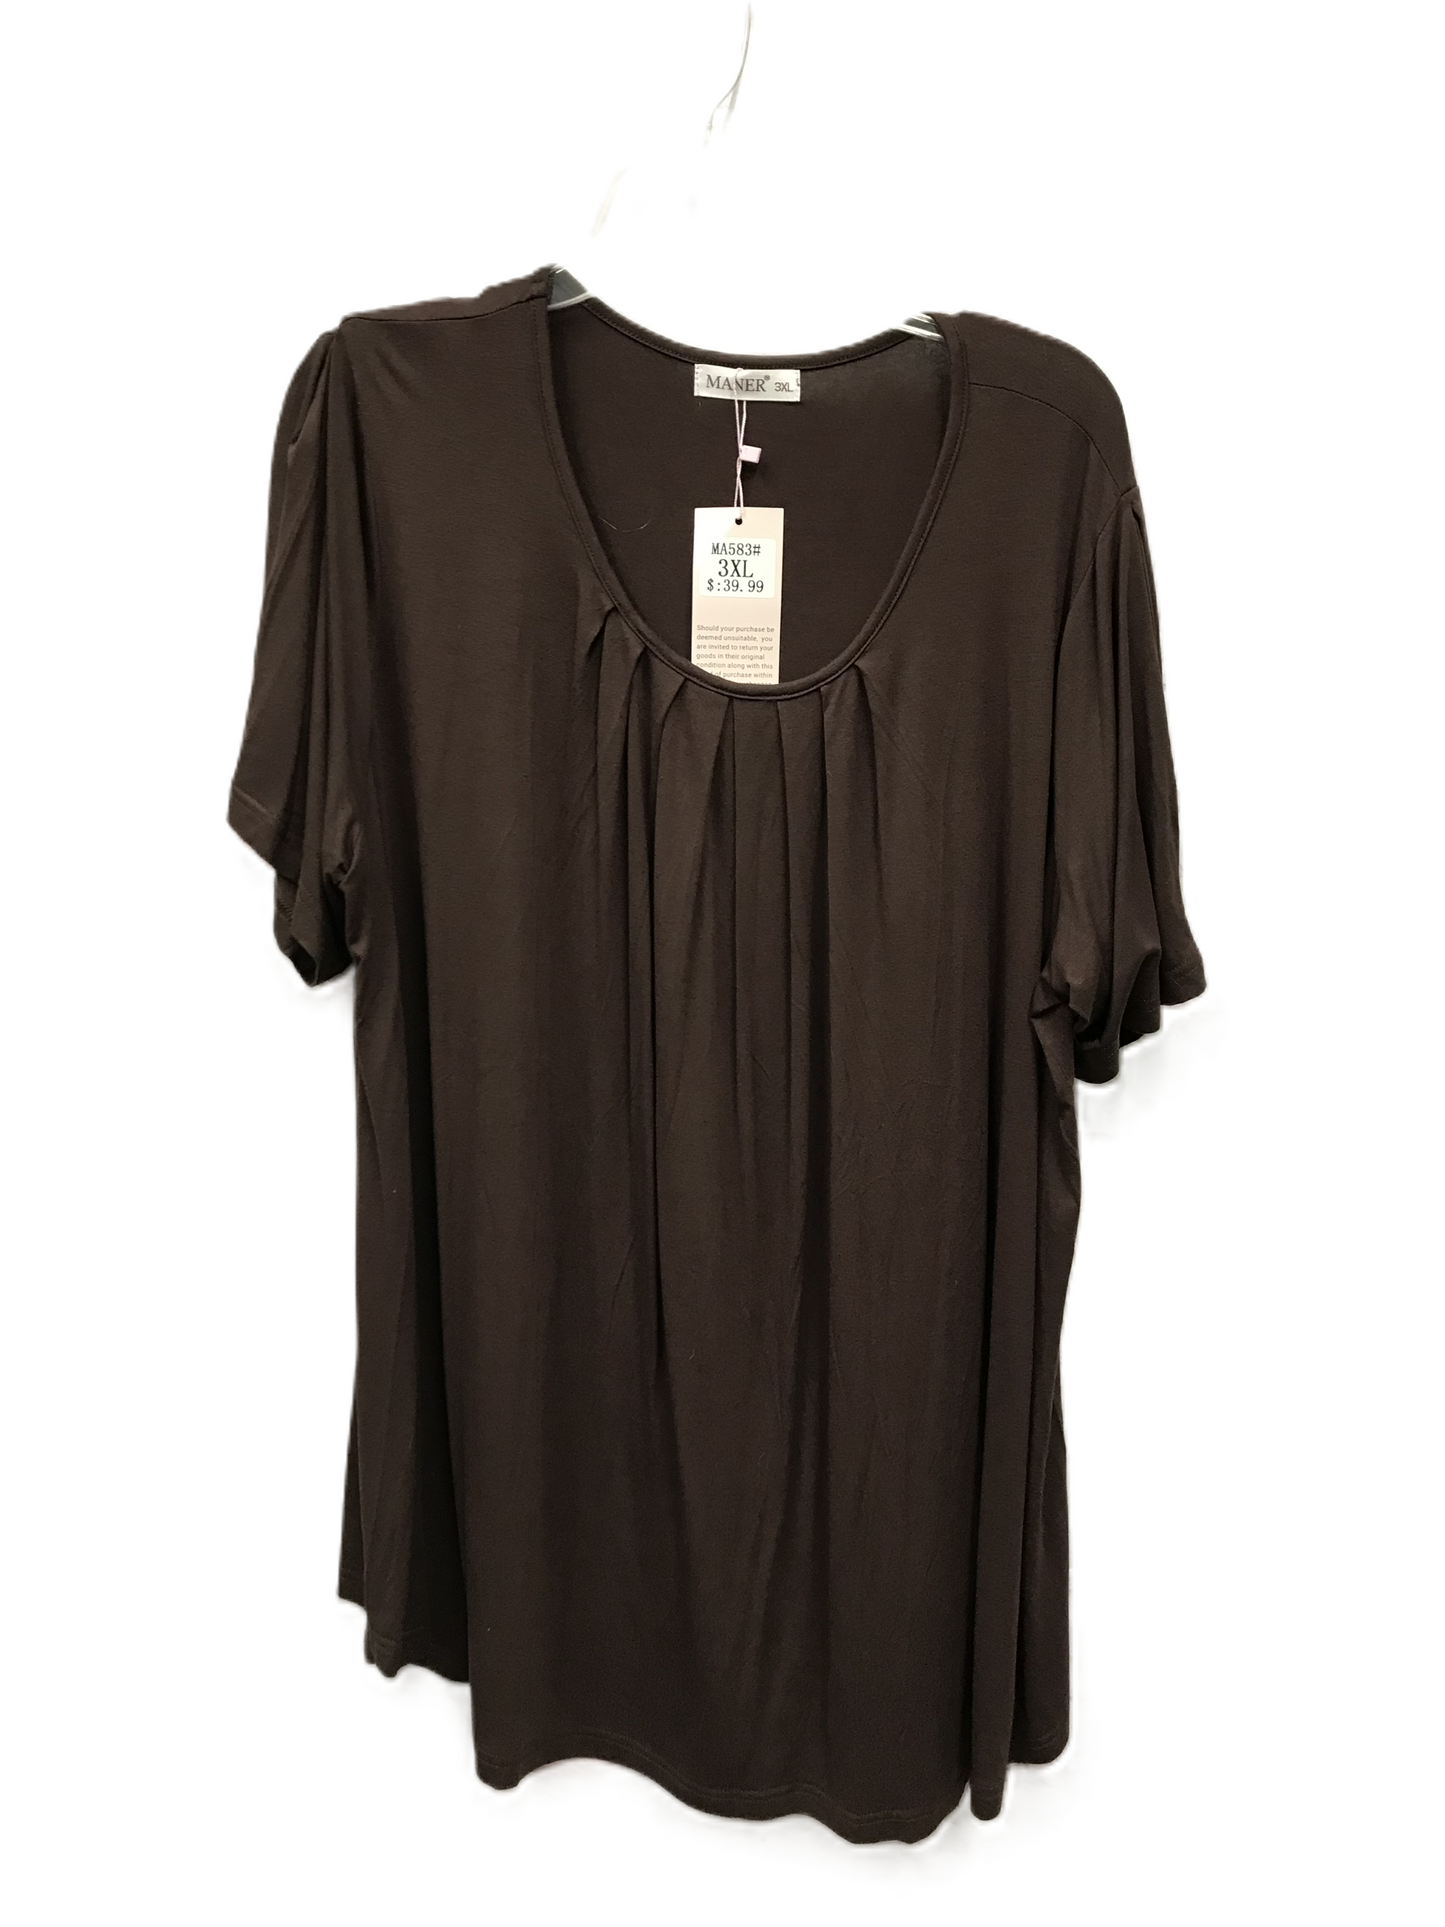 Brown Top Short Sleeve By maner, Size: 3x